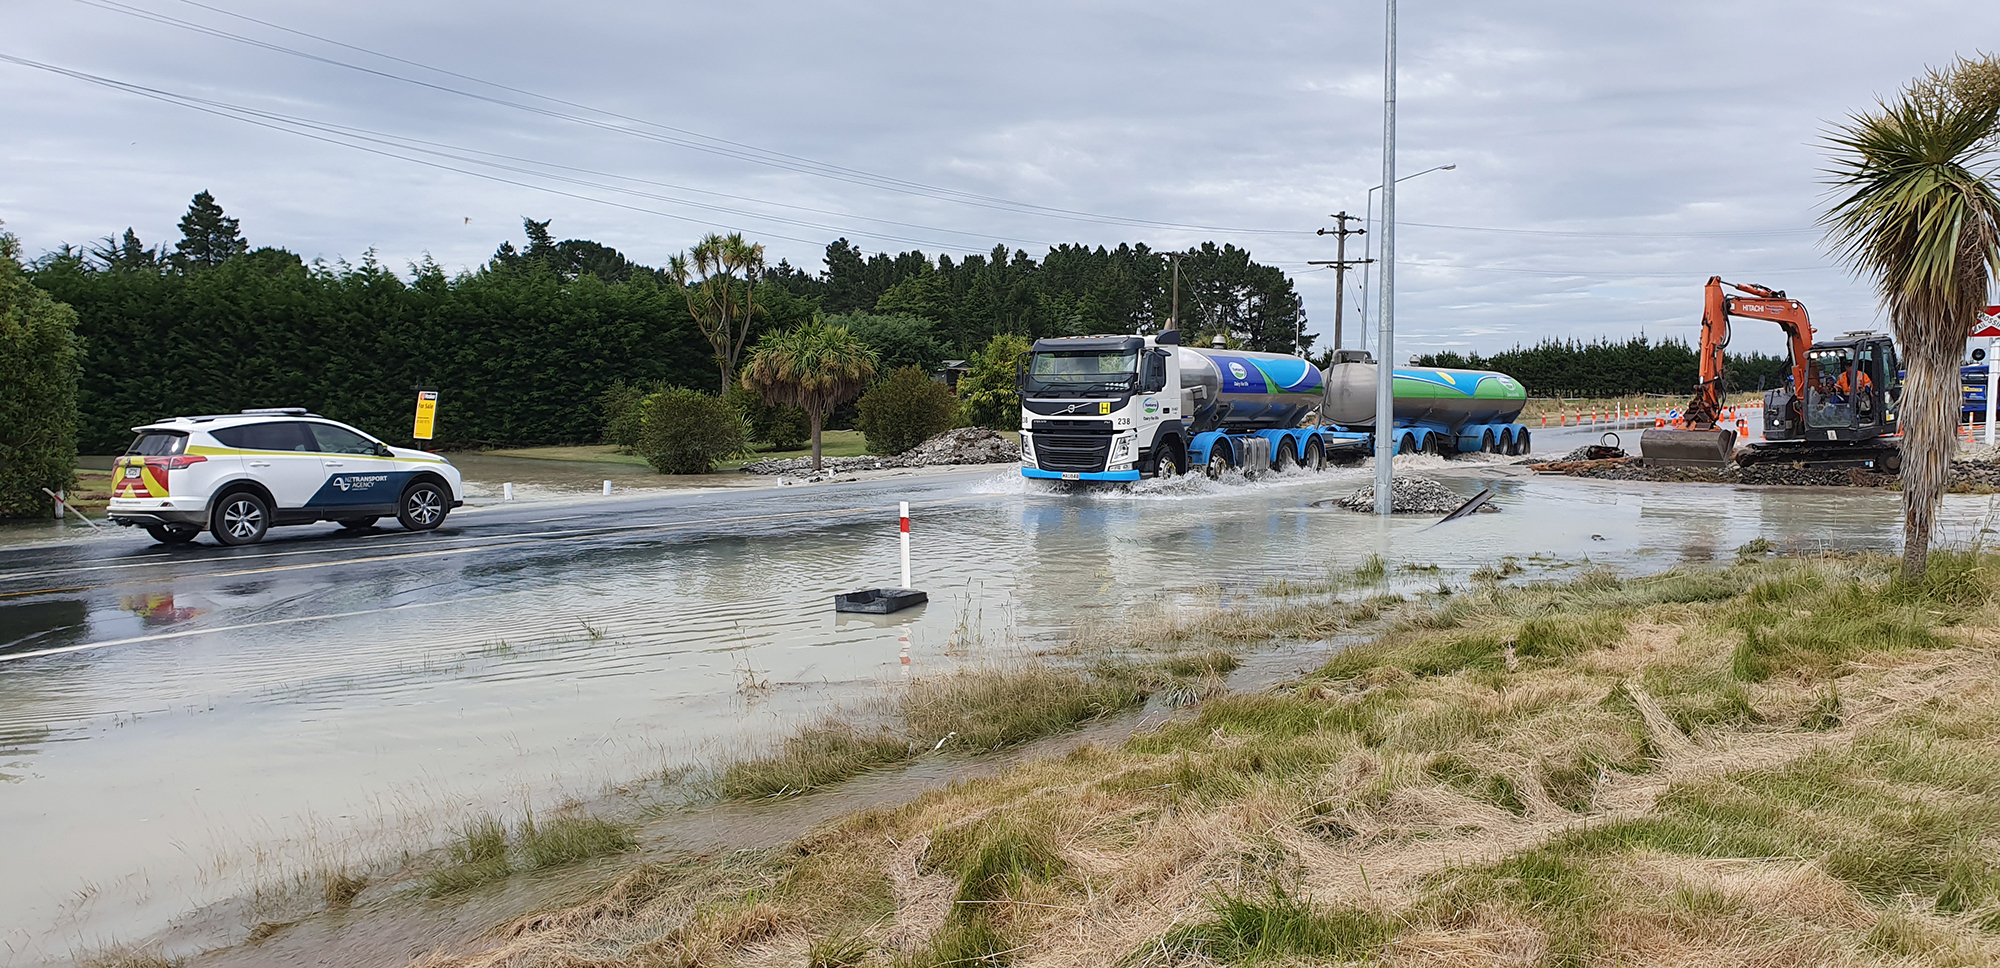 The Orari SH1/79 intersection earlier today, water now well below the top of wheels.